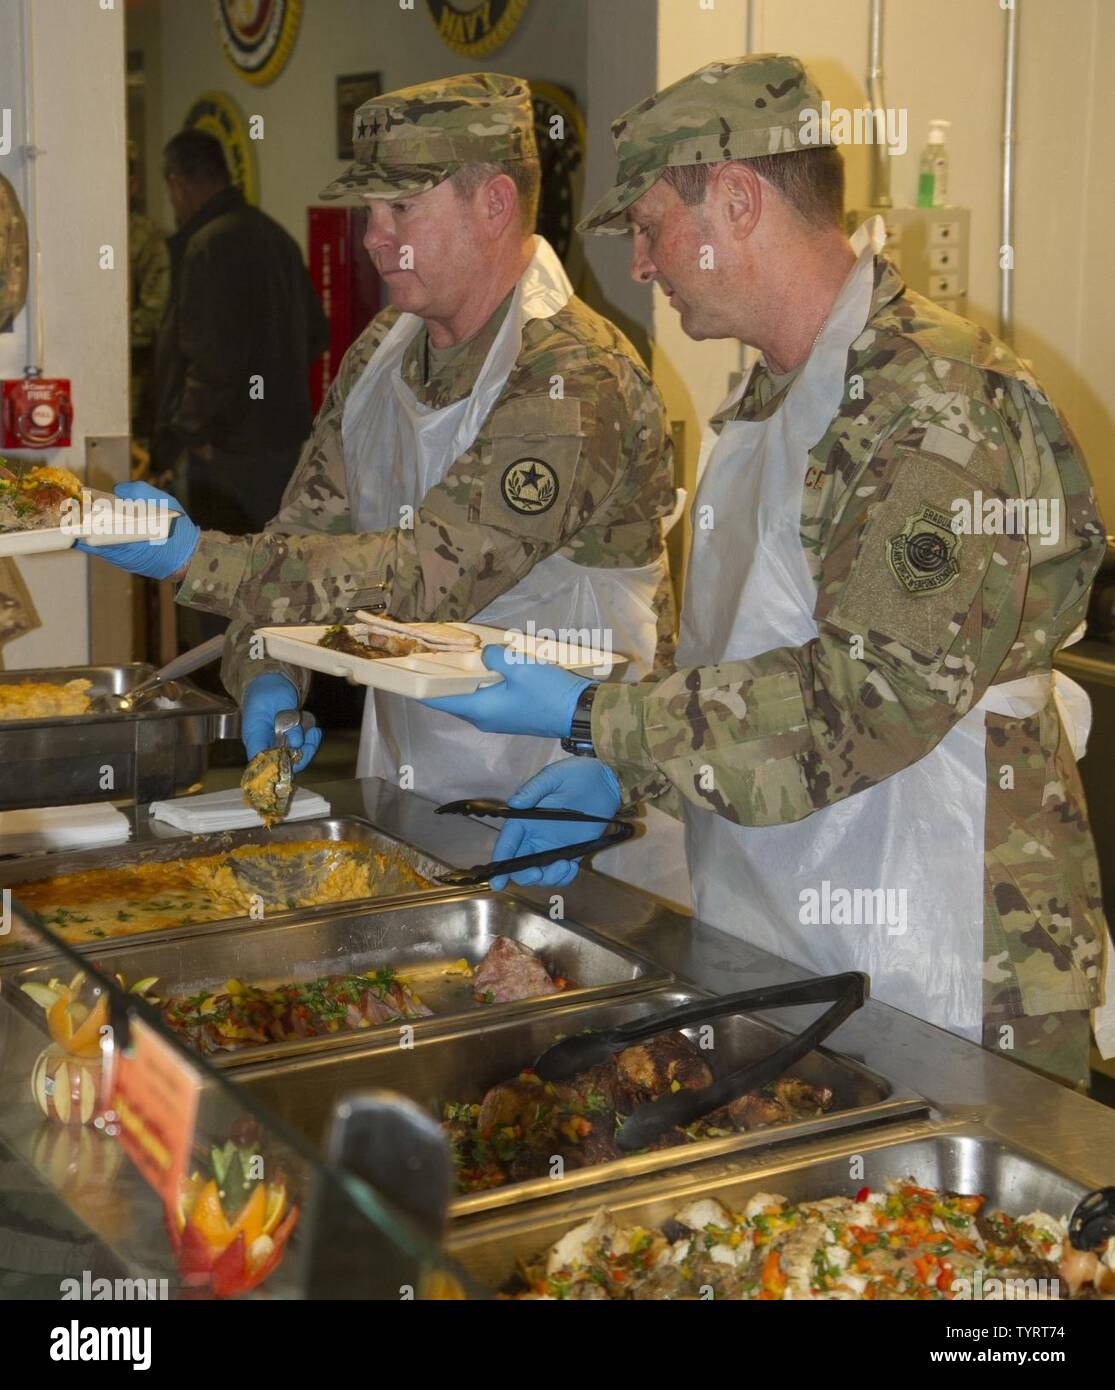 Gen. Joseph Lengyel, Chief National Guard Bureau, and Airforce, Maj. Gen. John Nichols, The Adjutant General, Texas, serve Thanksgiving lunch to coalition forces and Department of the Army civilians at Bagram Airfield, Afghanistan. Stock Photo